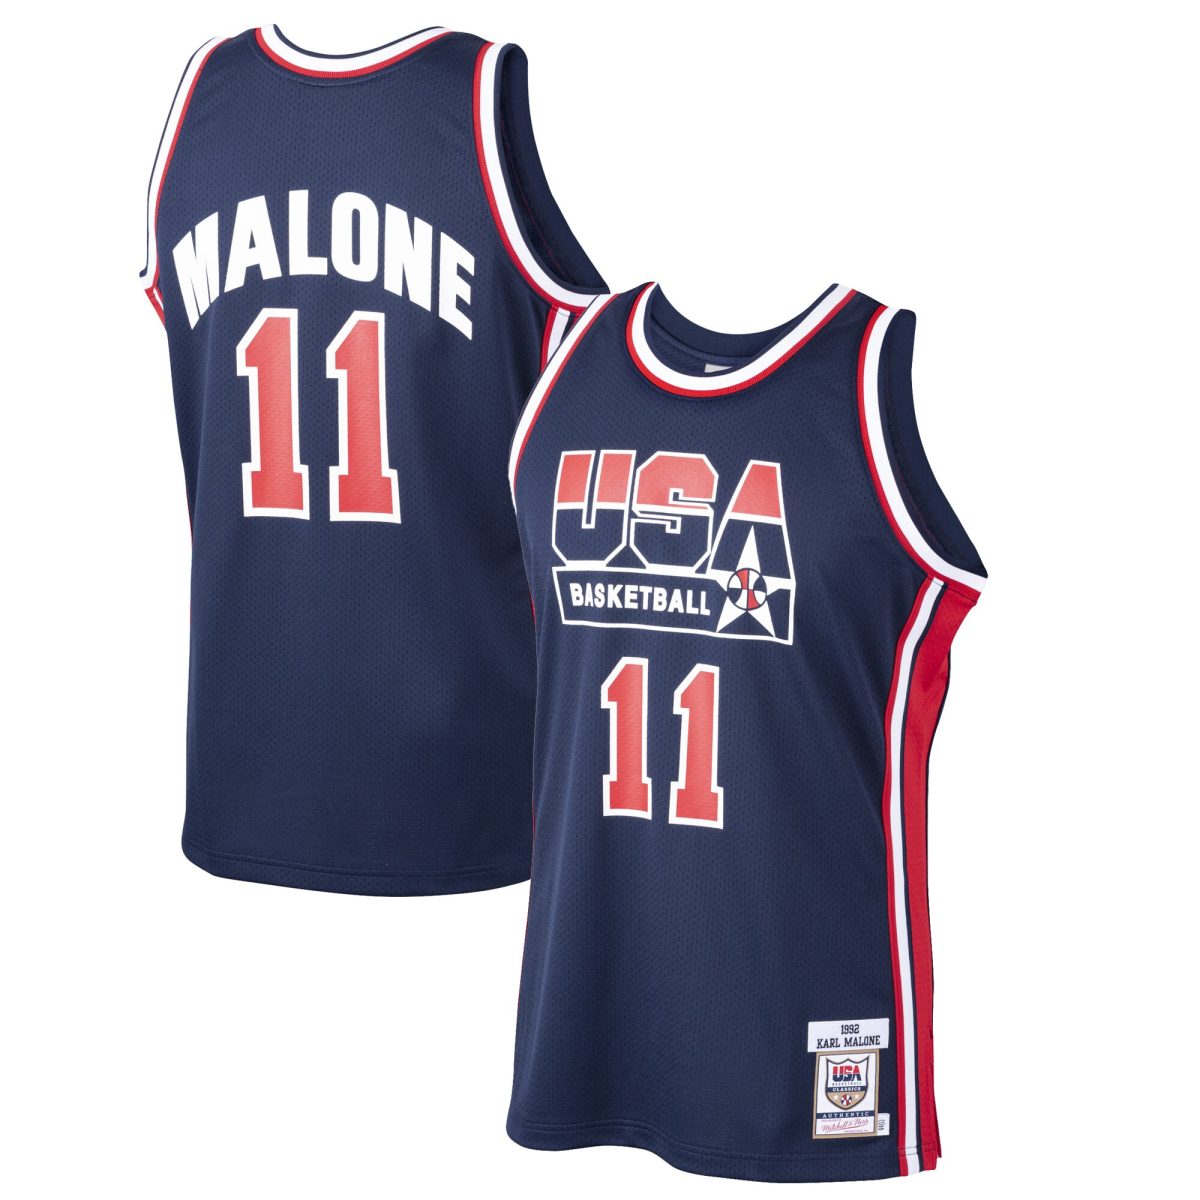 Men's Mitchell & Ness Karl Malone Navy USA Basketball Home 1992 Dream Team Authentic Jersey